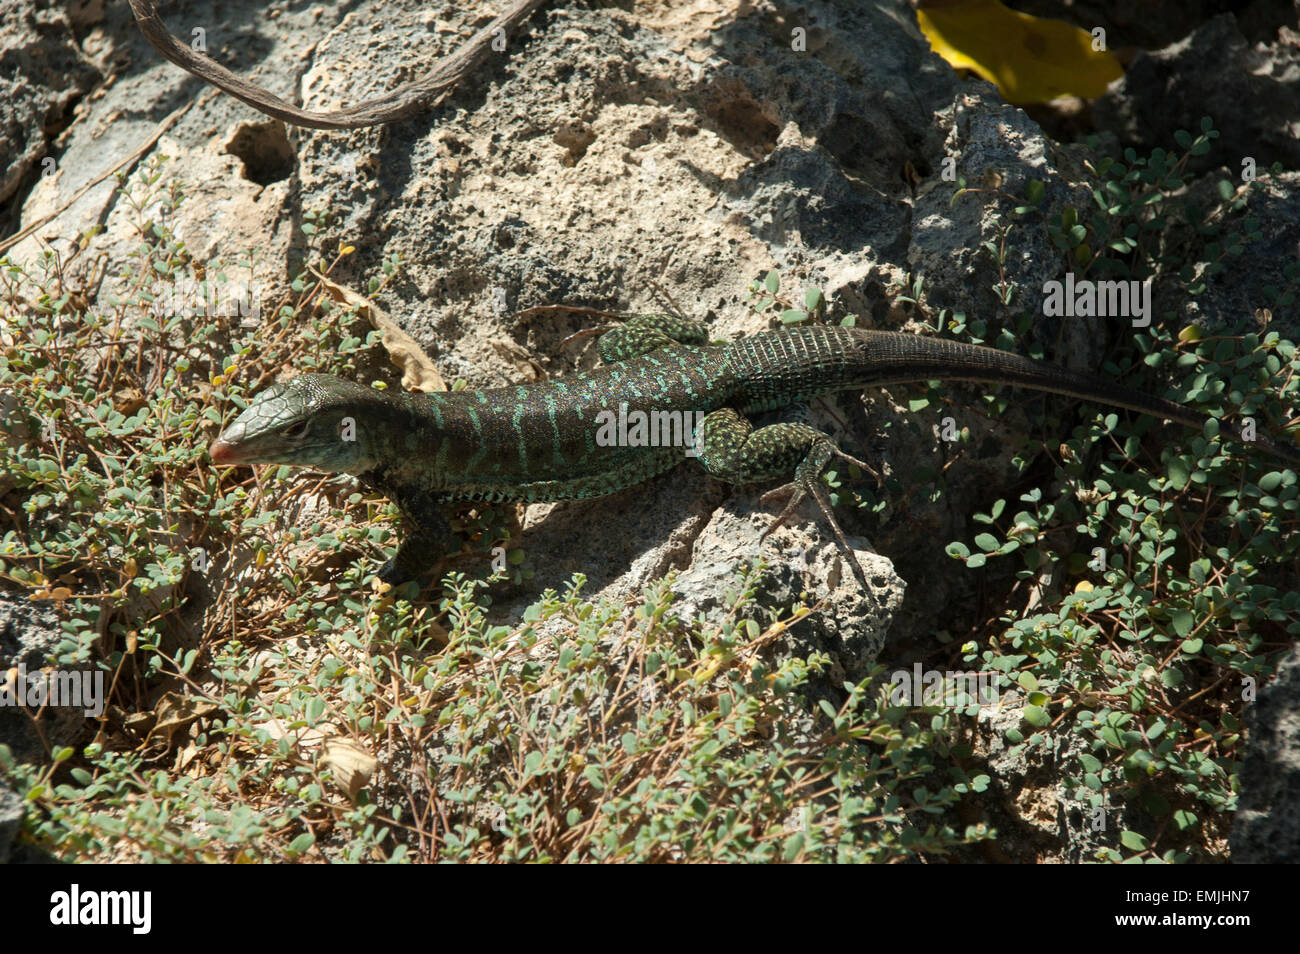 On Great Bird Island off Antiguan coast some Griswold's Ameiva lizards are sunbathing, an endemic lizard to Antigua and Barbuda. Stock Photo